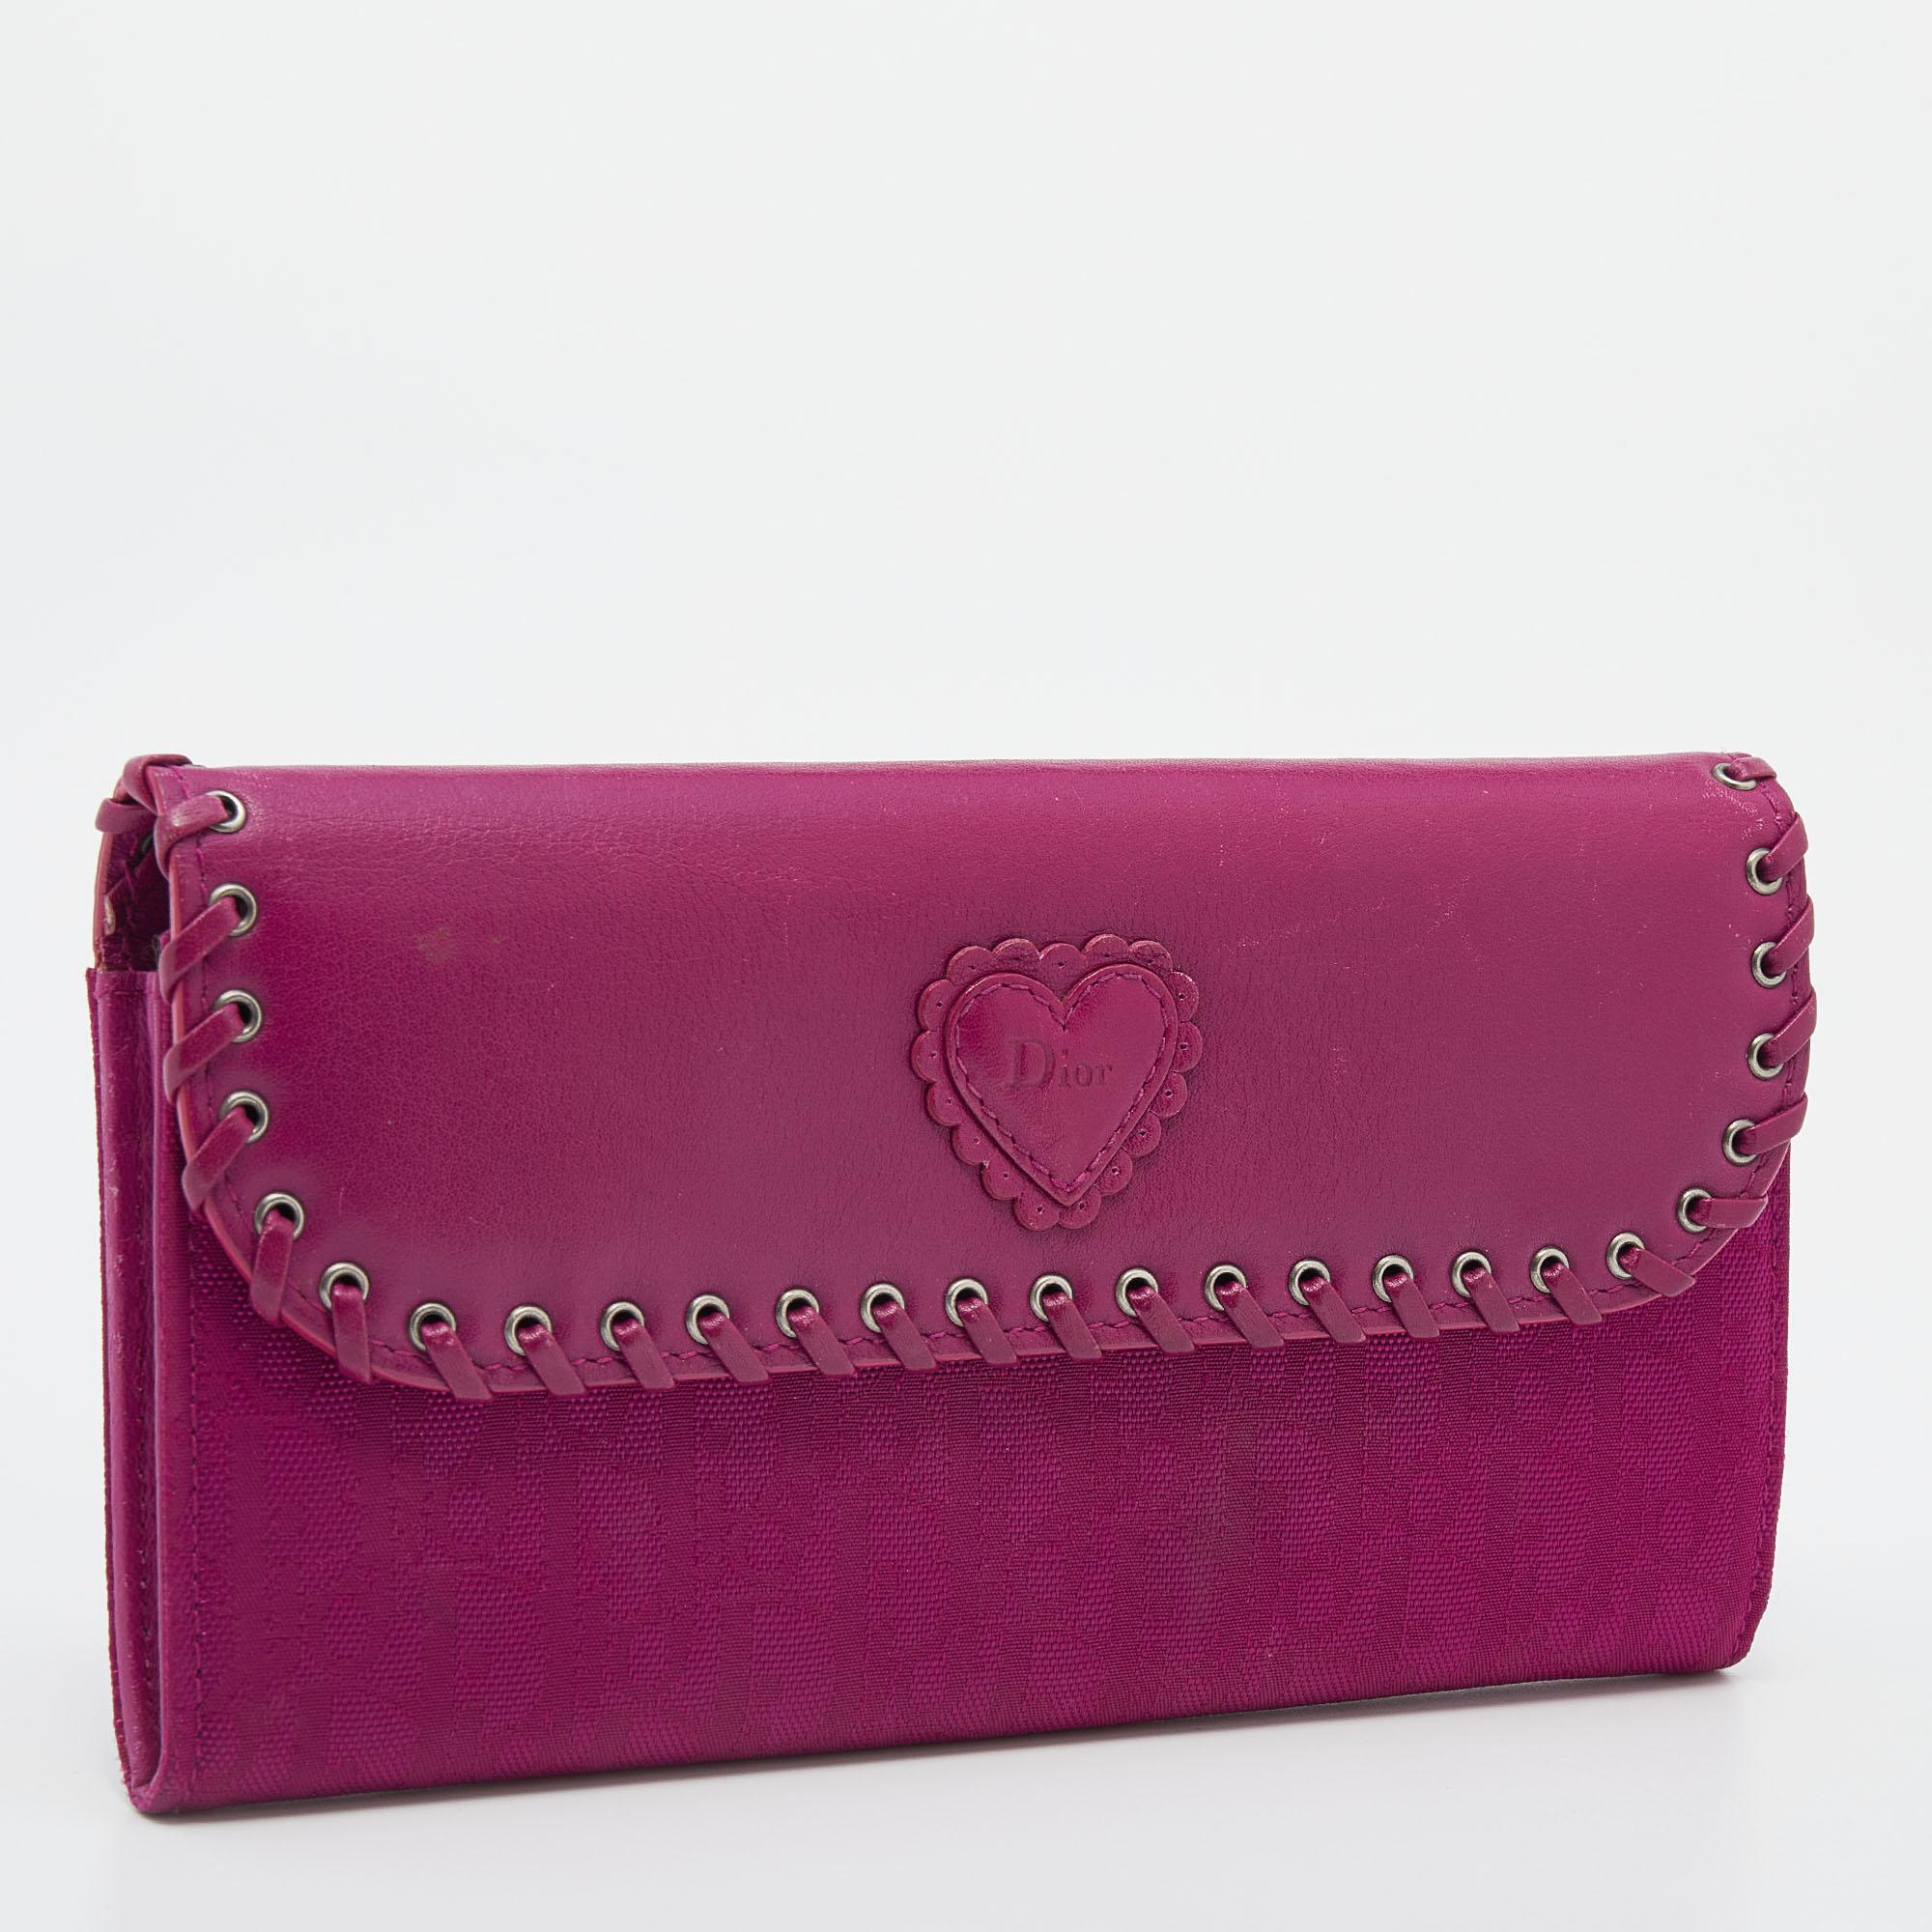 juicy couture wallet with red heart